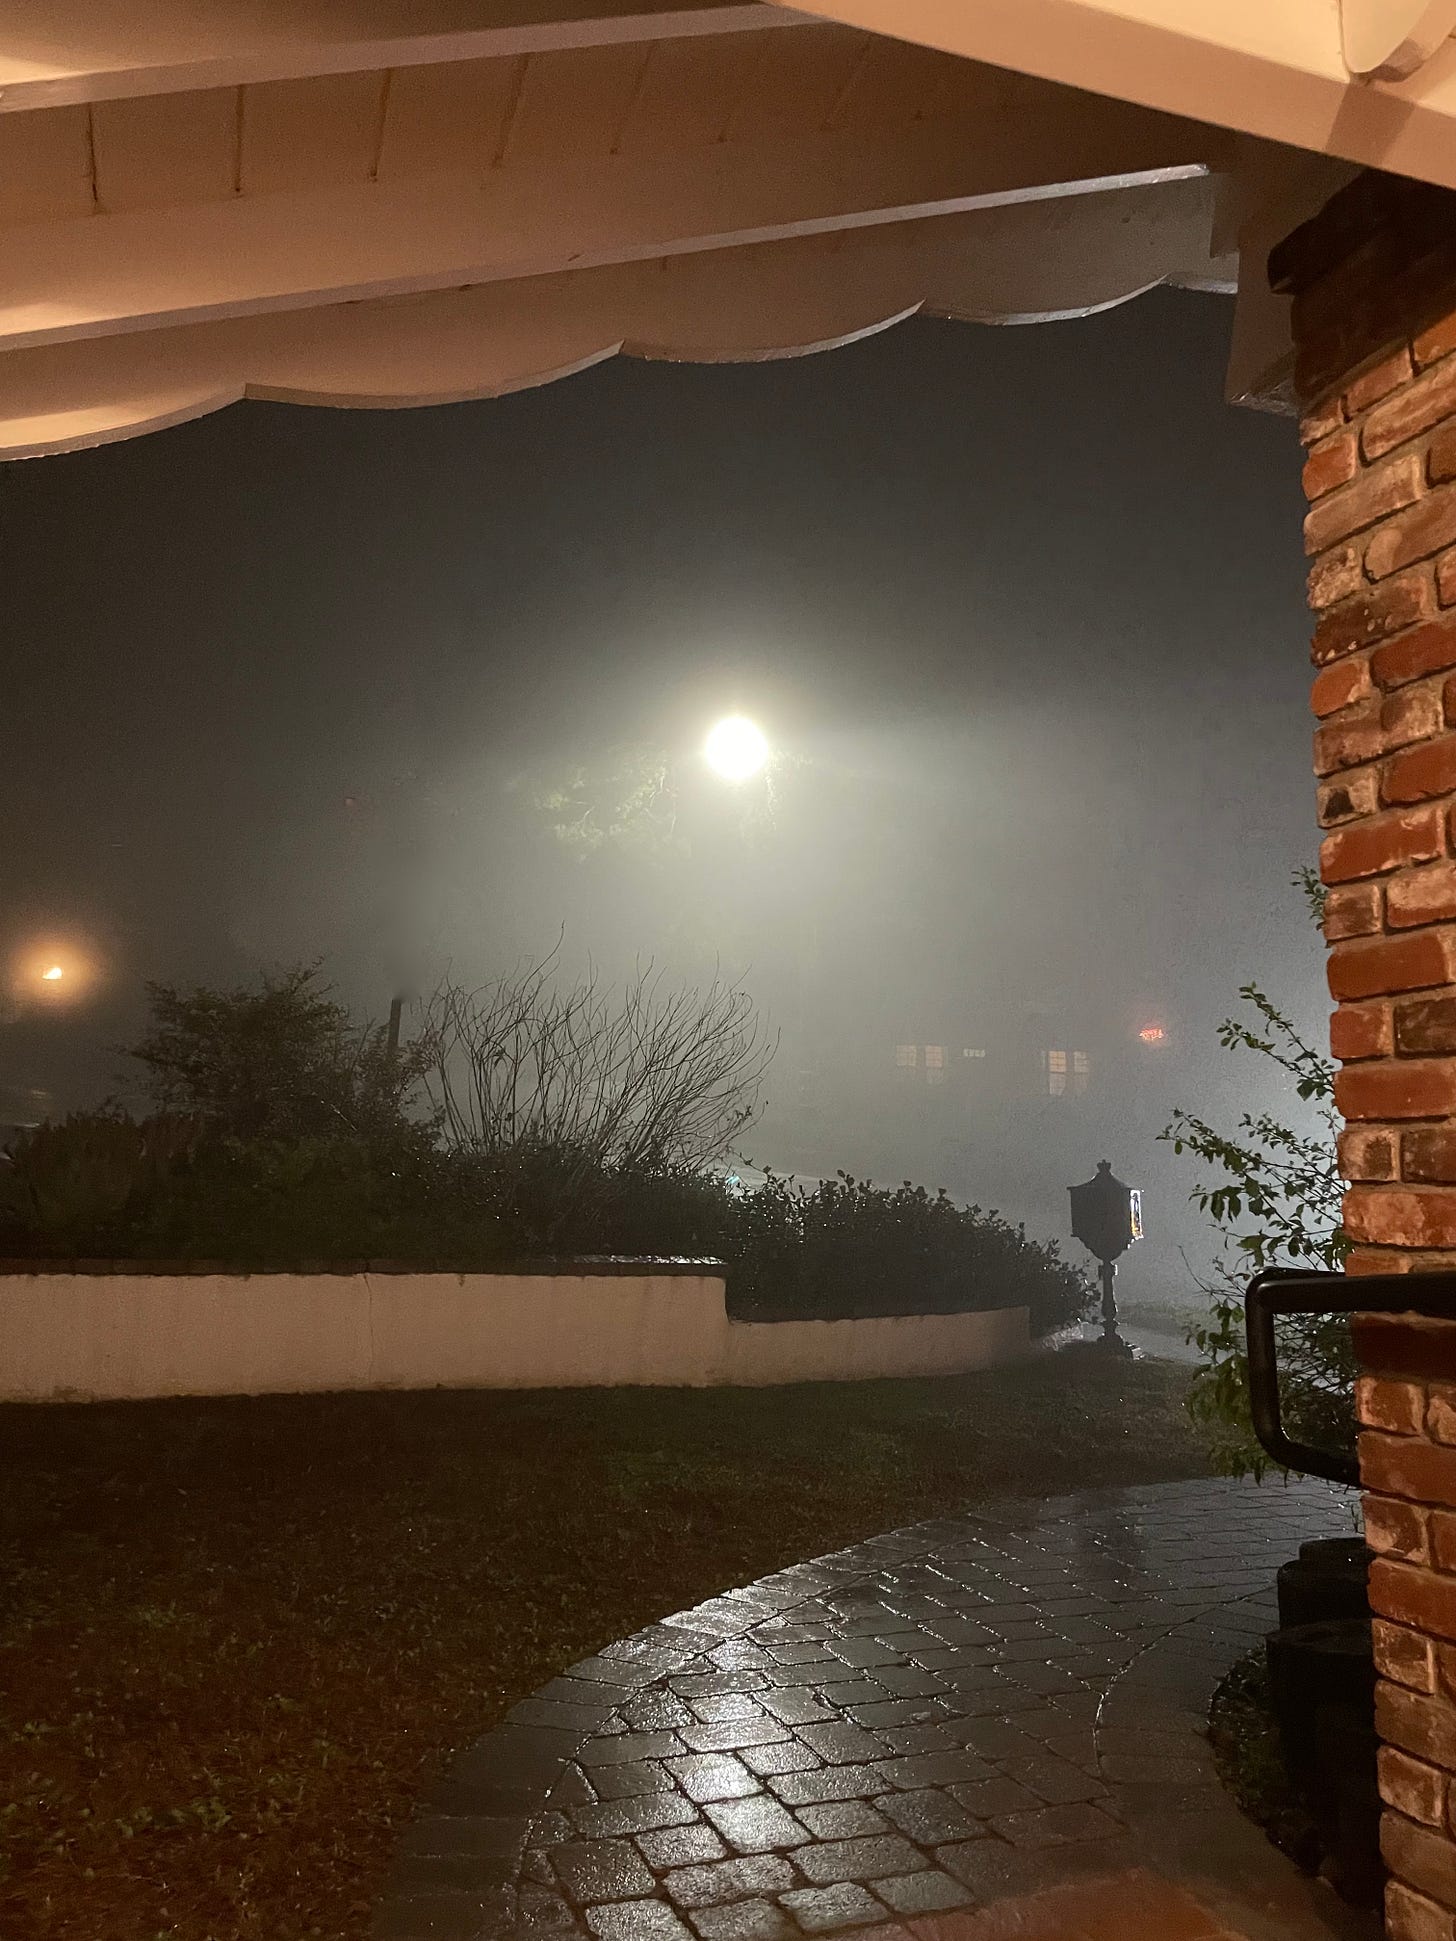 A view from a front porch on a rainy night. There's a brick wall to the right, a woden trellis overhead. There's a light fog and trees and bushes silhouetted in the street light.